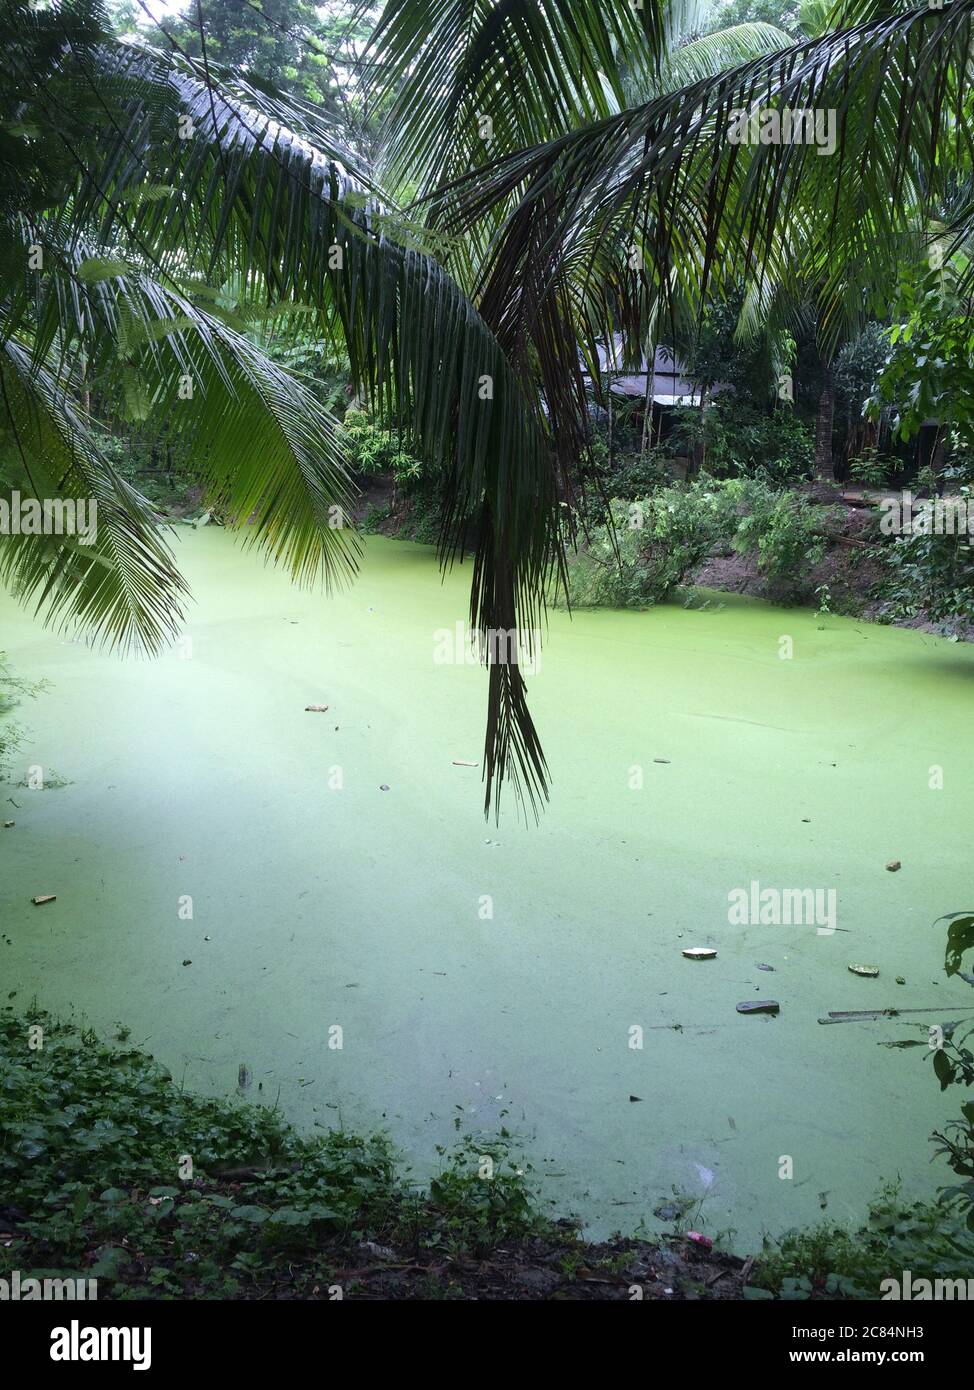 Trees, plants and other shrubs border a still duckweed covered pond in a village in Barisal, Bangladesh. Stock Photo